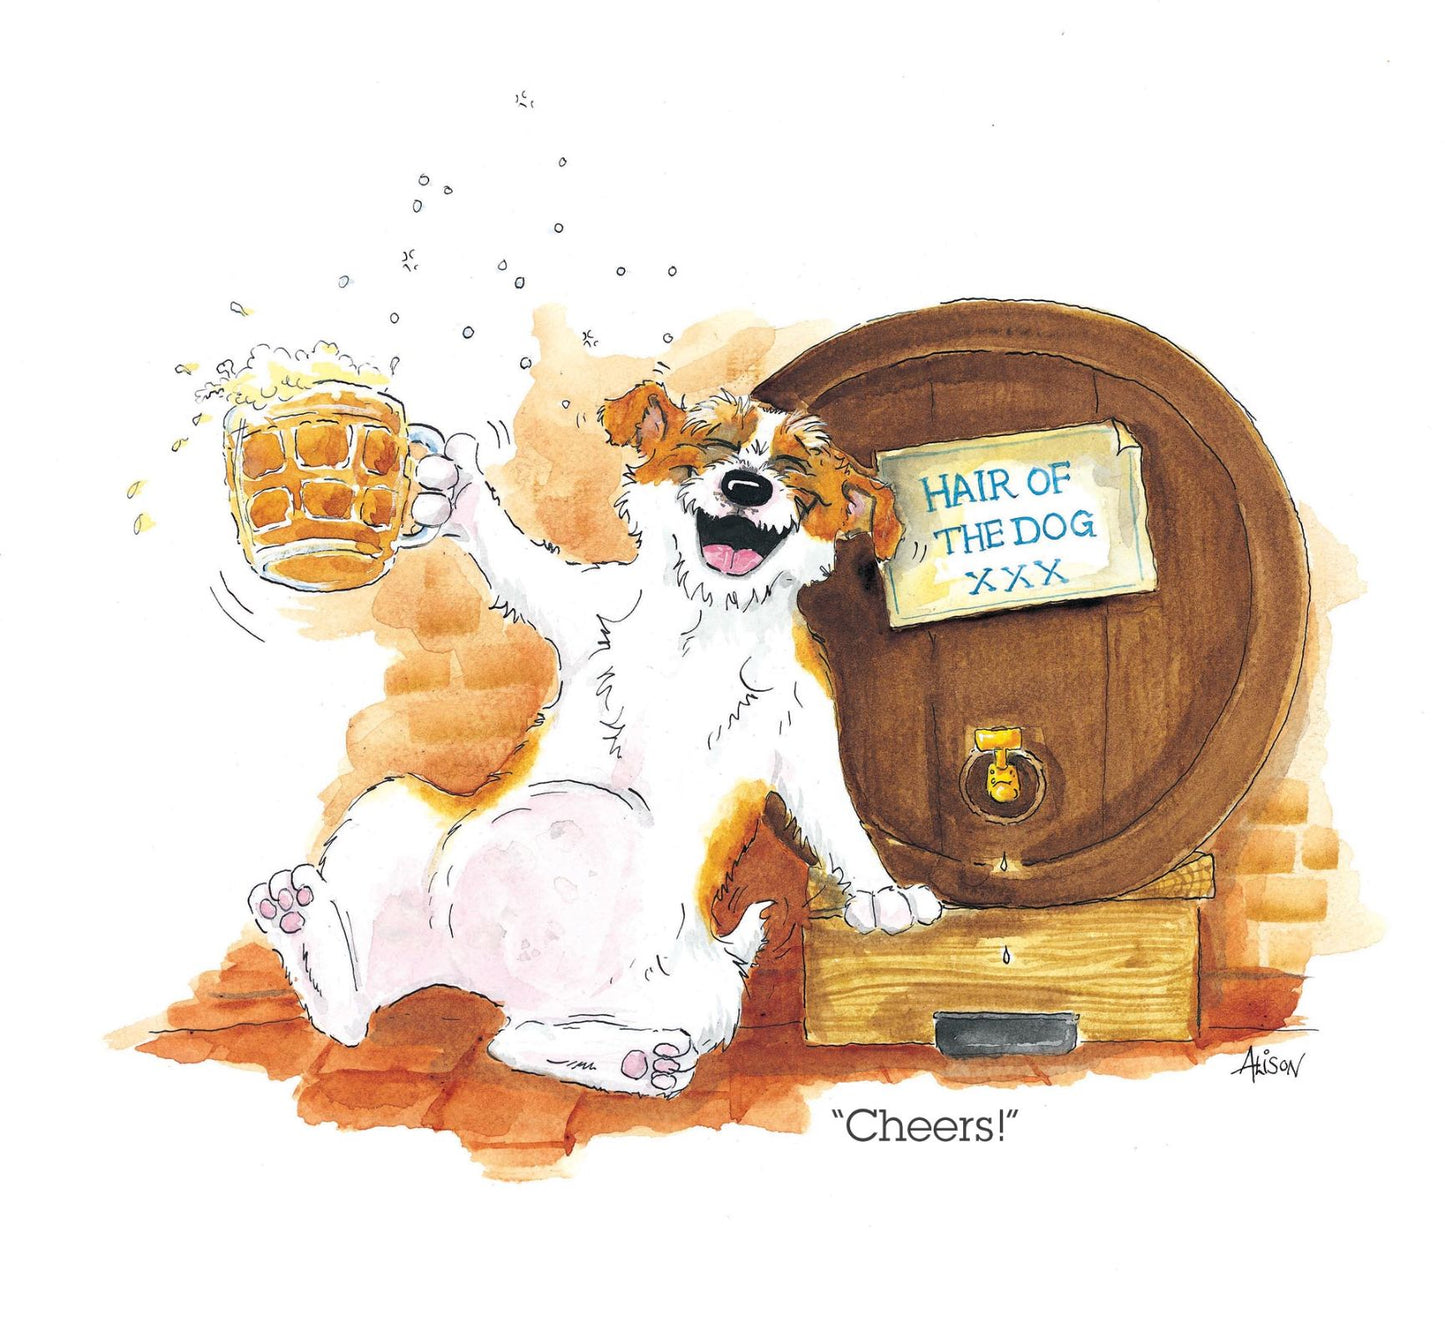 Cheers! Hair Of The Dog Drinking Alison's Animals Cartoon Greeting Card